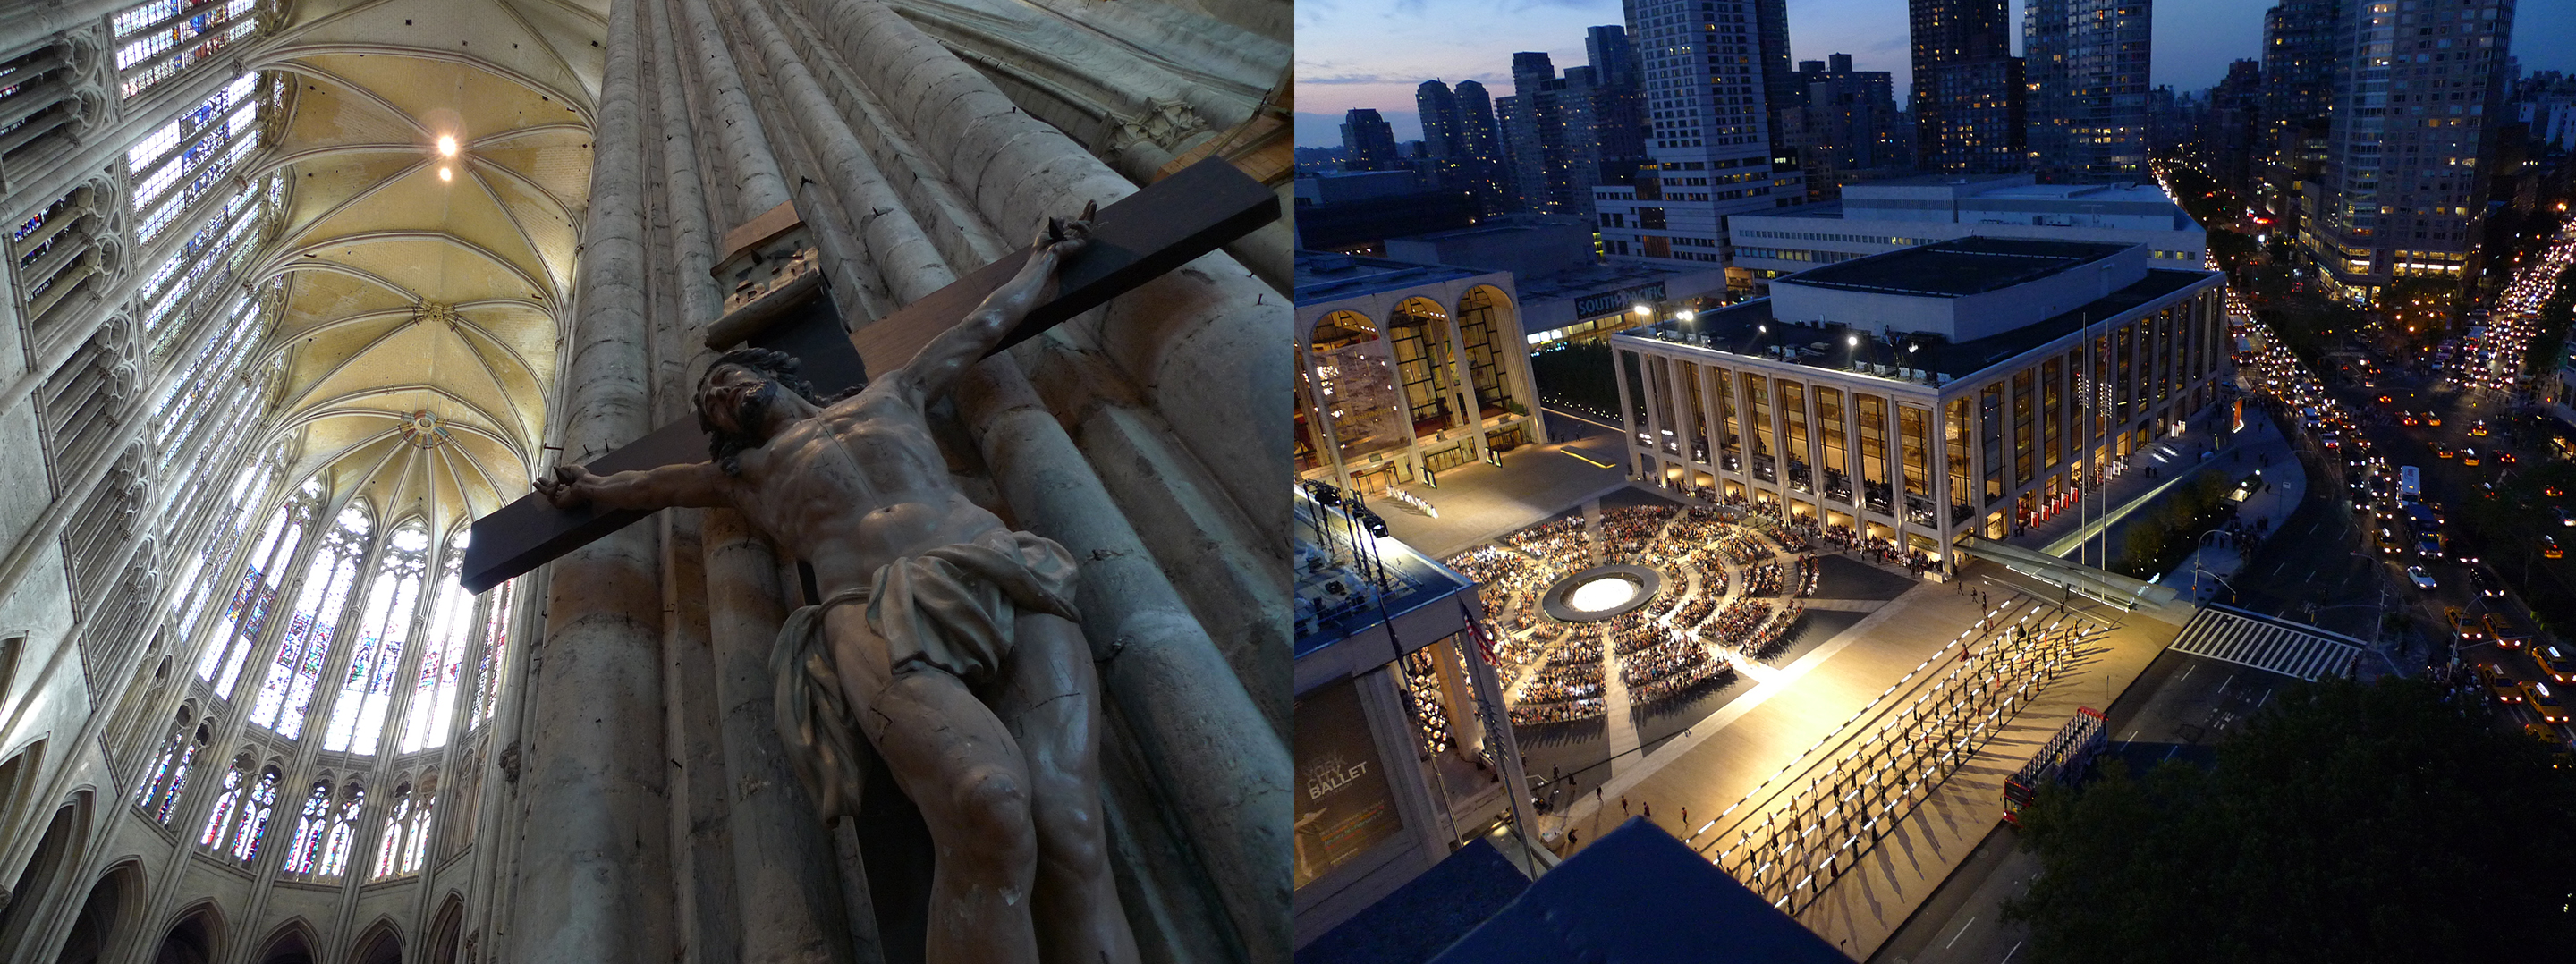 Still from PBS NOVA’s “Building the Great Cathedrals” and an image looking down on Lincoln Center